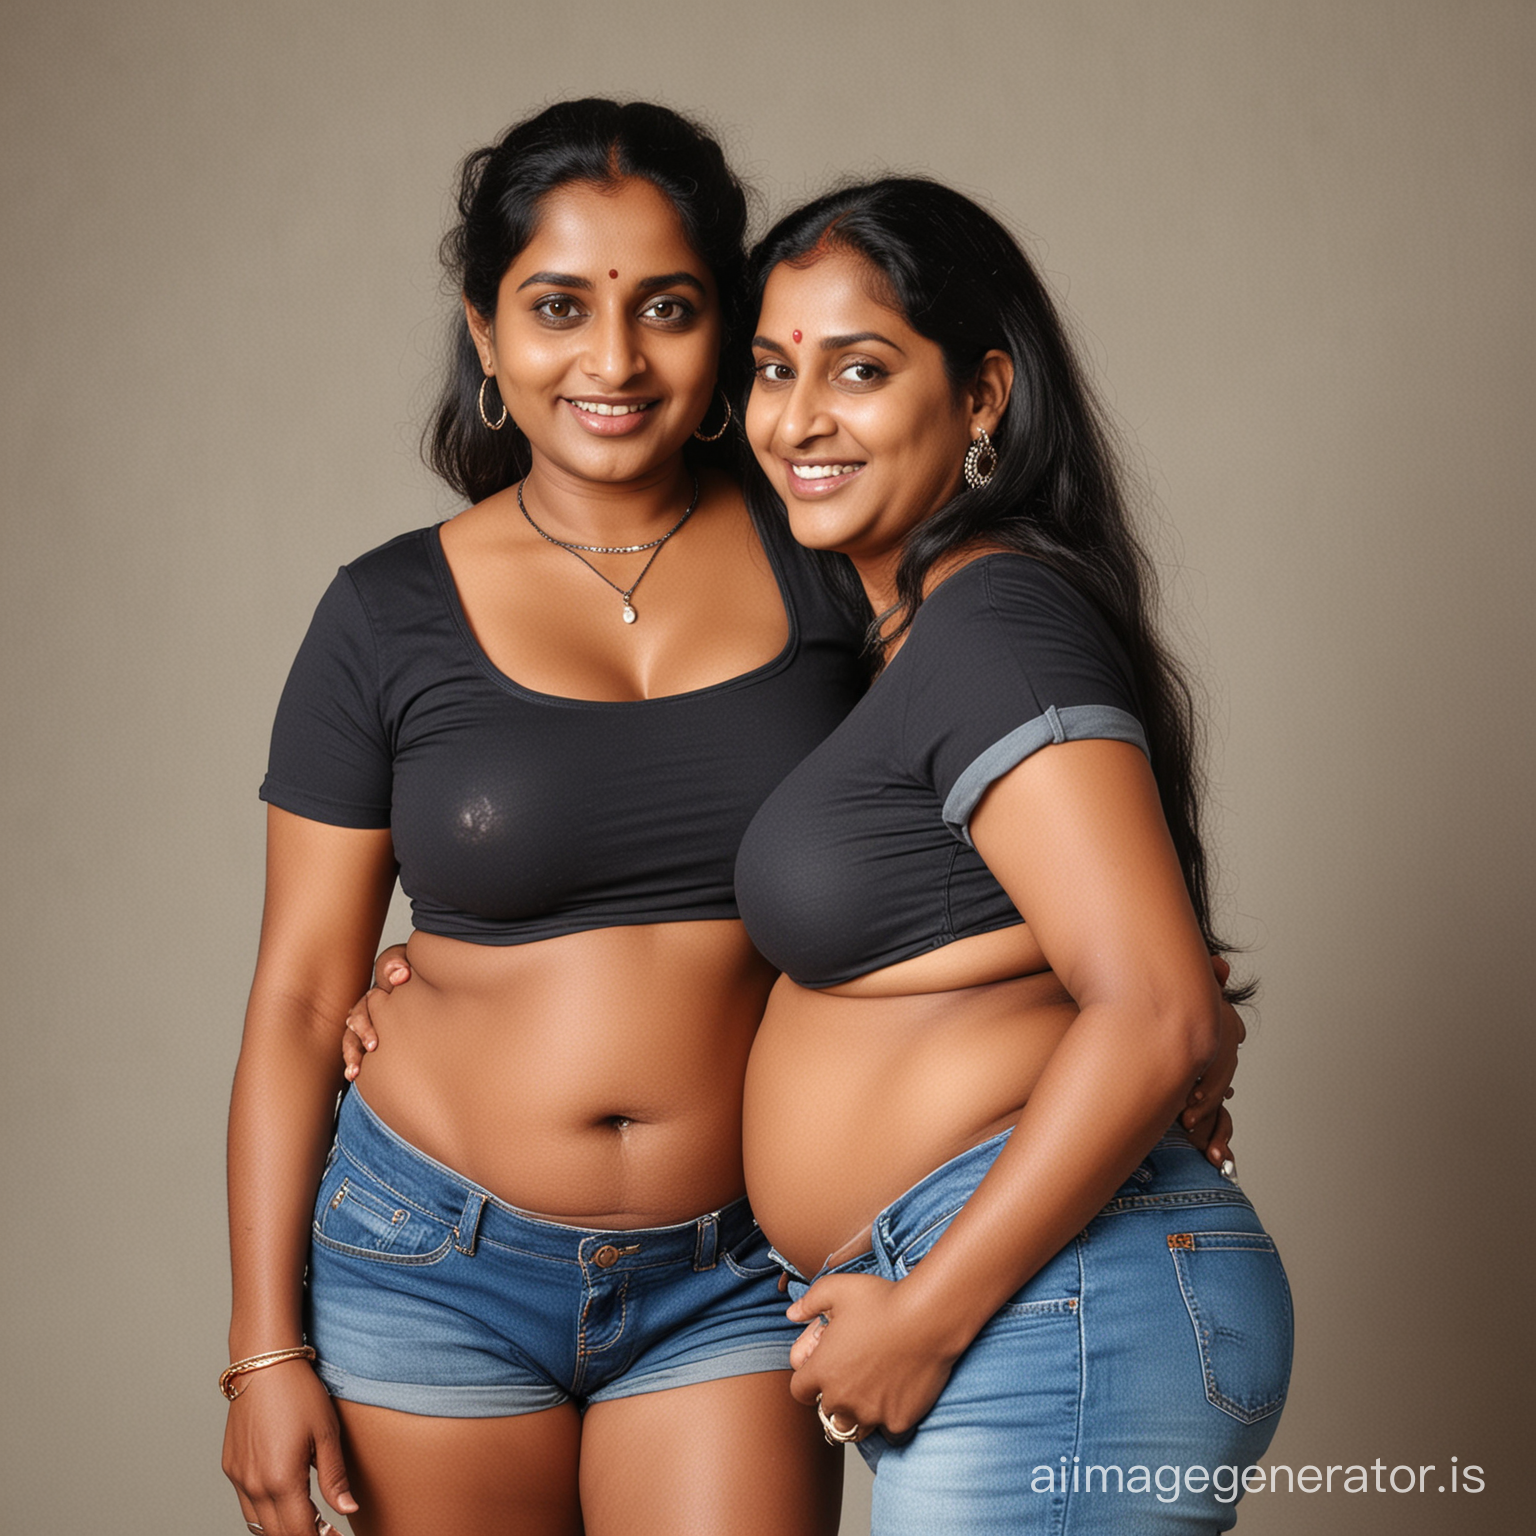 looks like easan sujatha, dark skinned fat 60 year old south indian aunty with chubby cheeks, huge saggy breasts, with fleshy belly and deep navel and big buttocks, wearing nose ring, tight tops and denim shorts hugging her young lover.